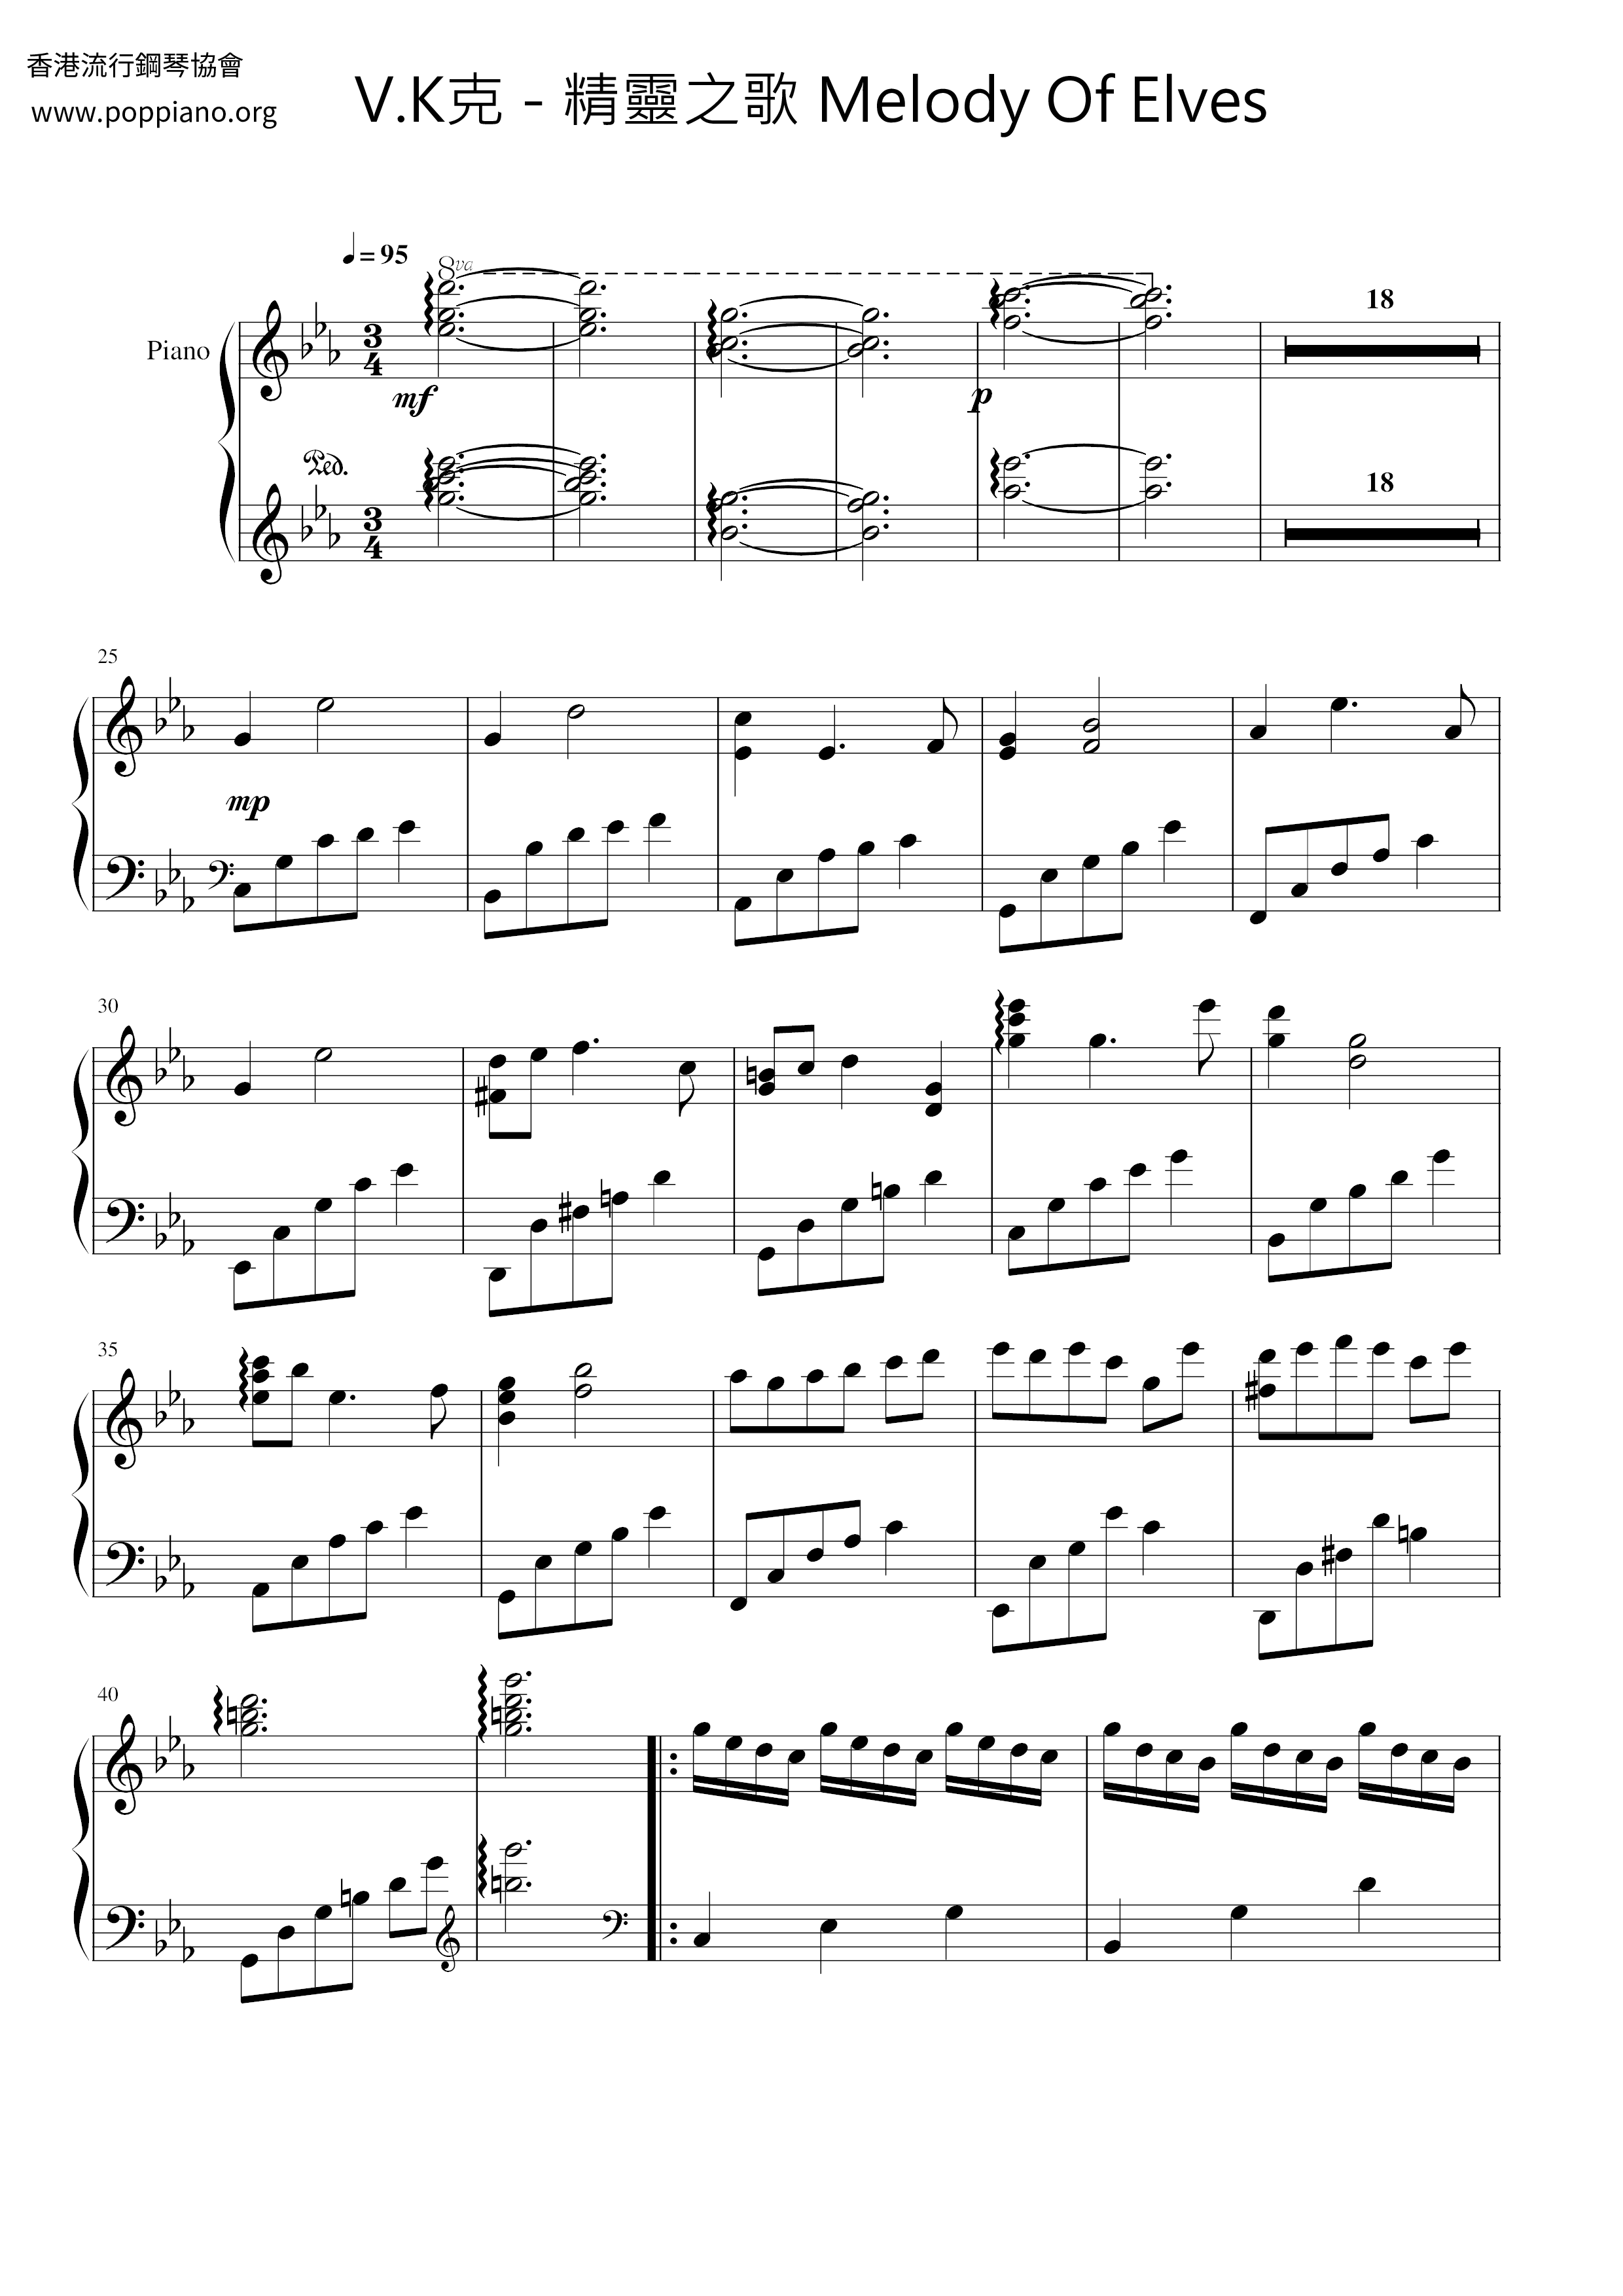 Melody Of Elves Score